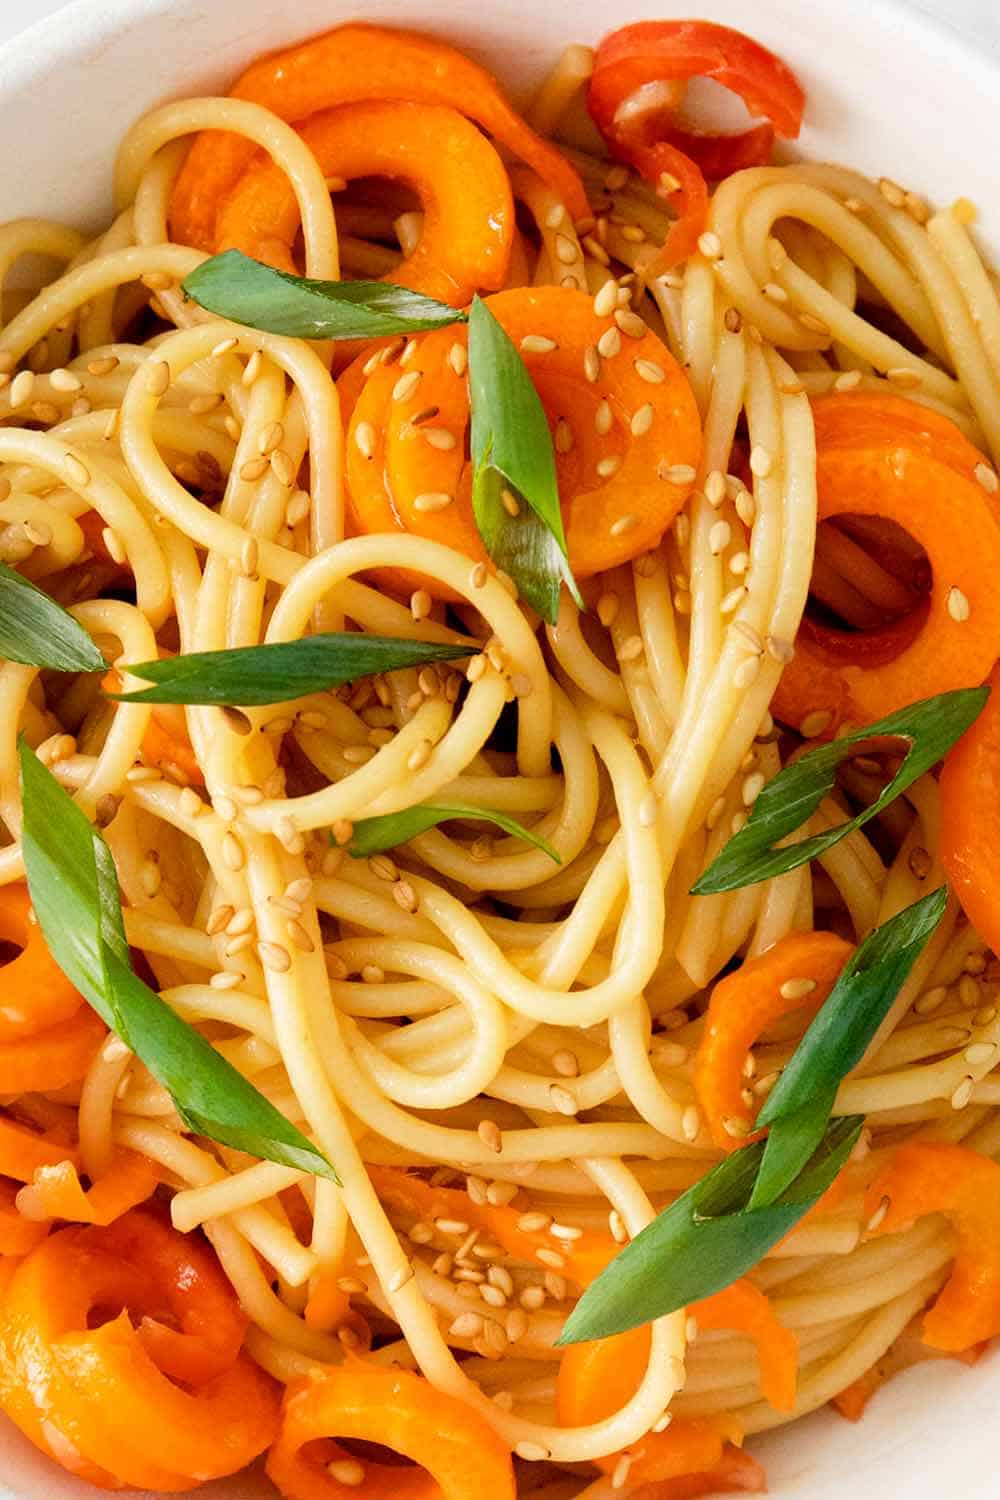 Cold Sesame Noodle Salad with Carrots and Sesame Seeds